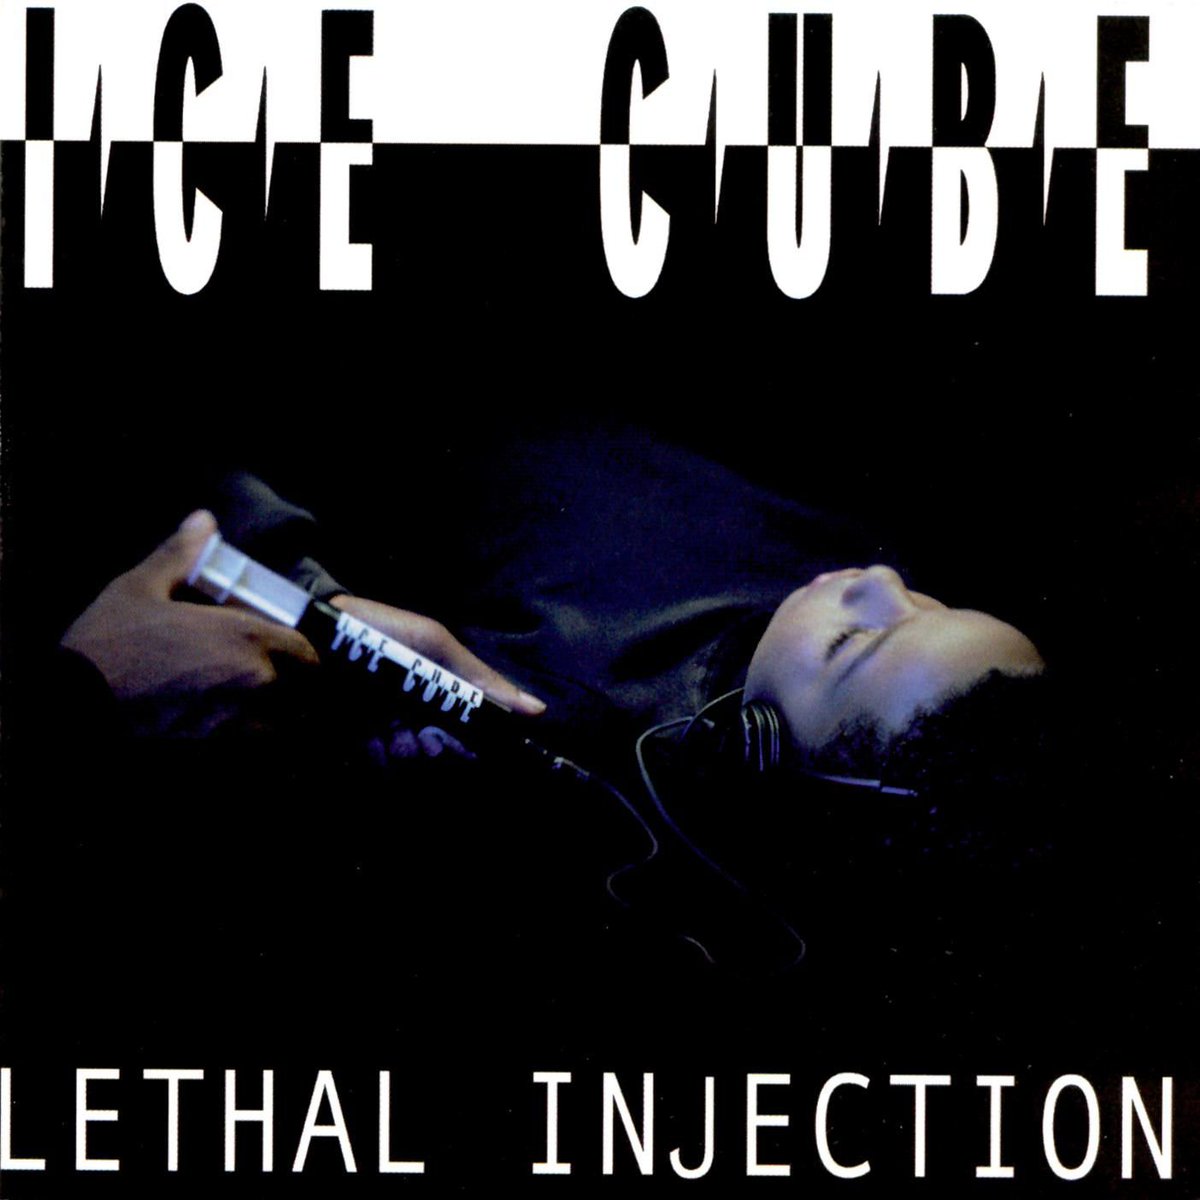 Today in 1993, #LethalInjection was released. https://t.co/UhwpO1grMZ